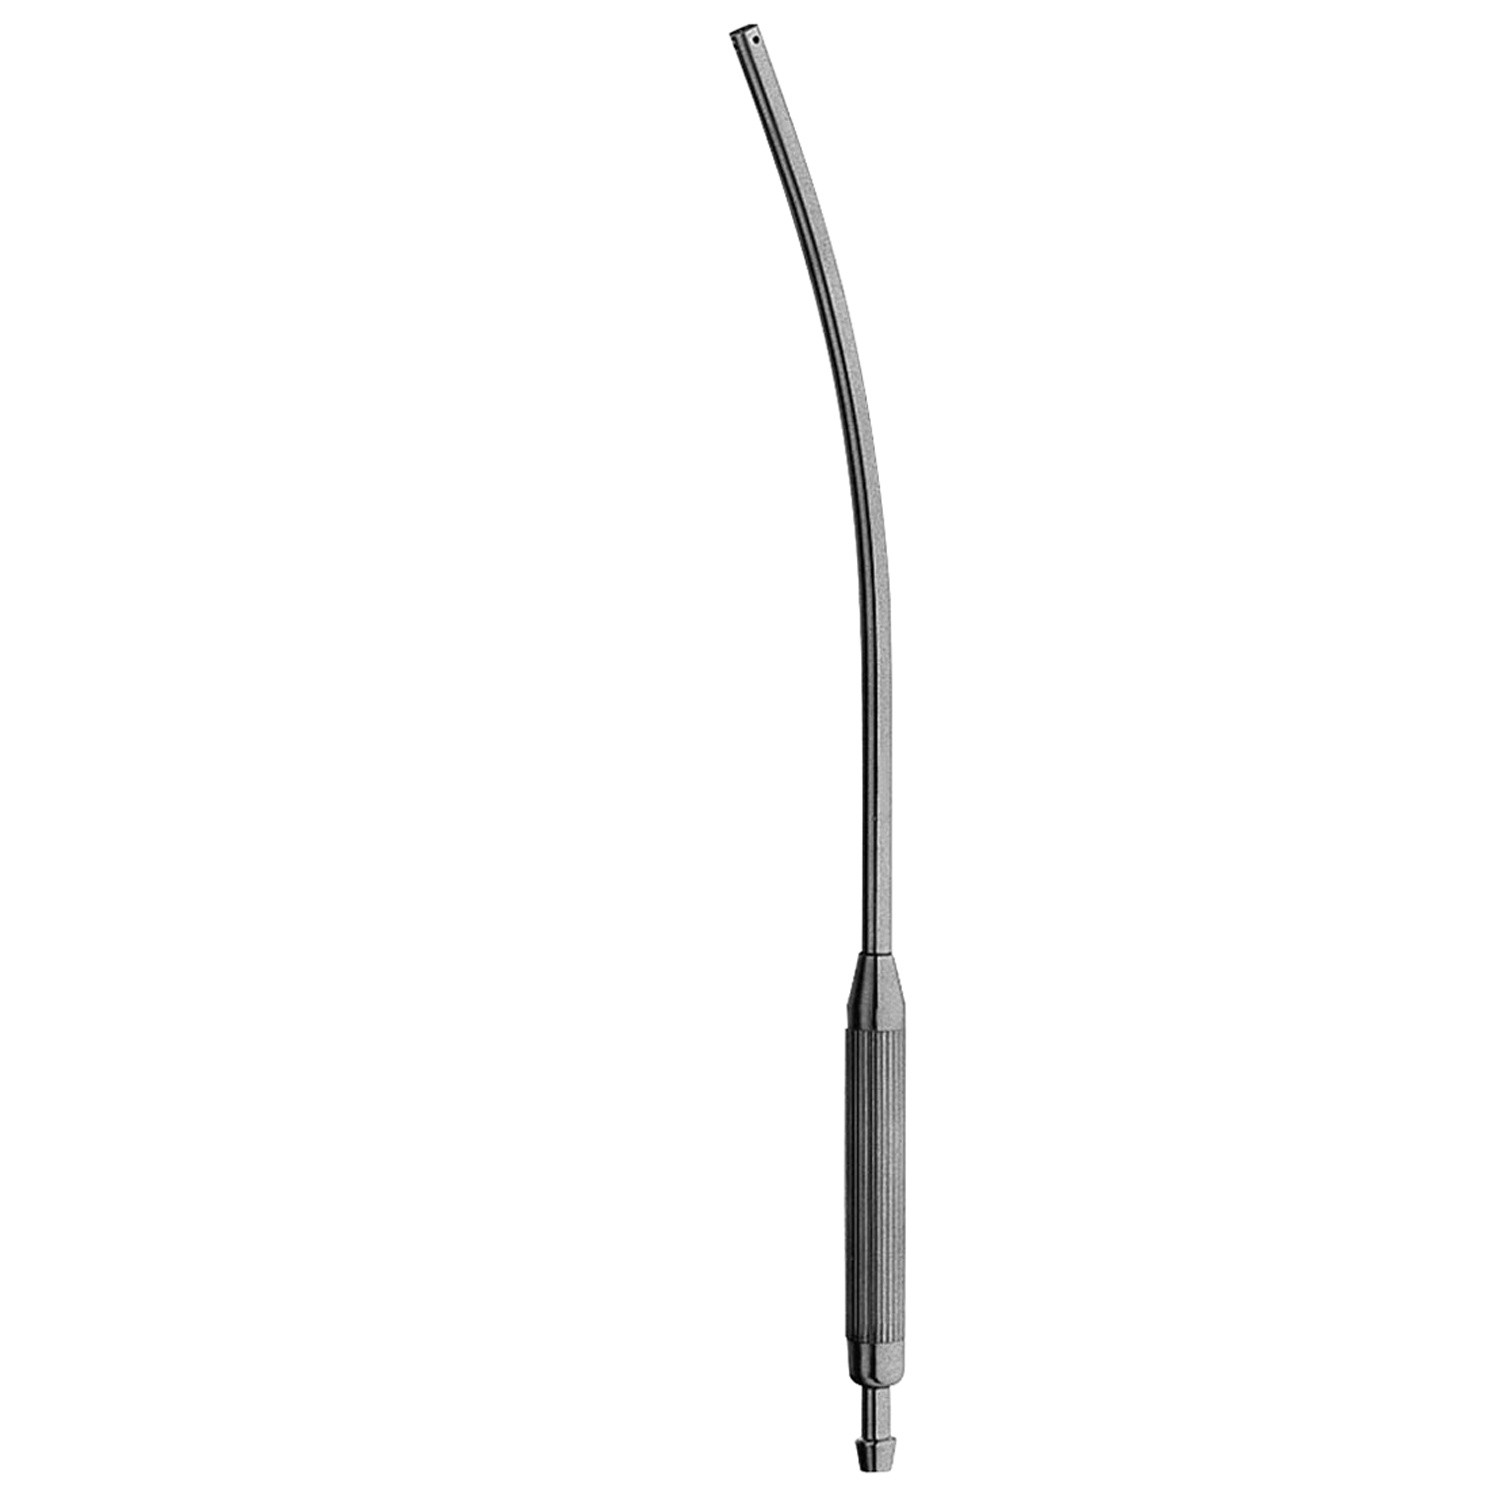 Cooley Graft Suction Tube, 8.0 Mm Wide Tip, 13" (33.0 Cm)